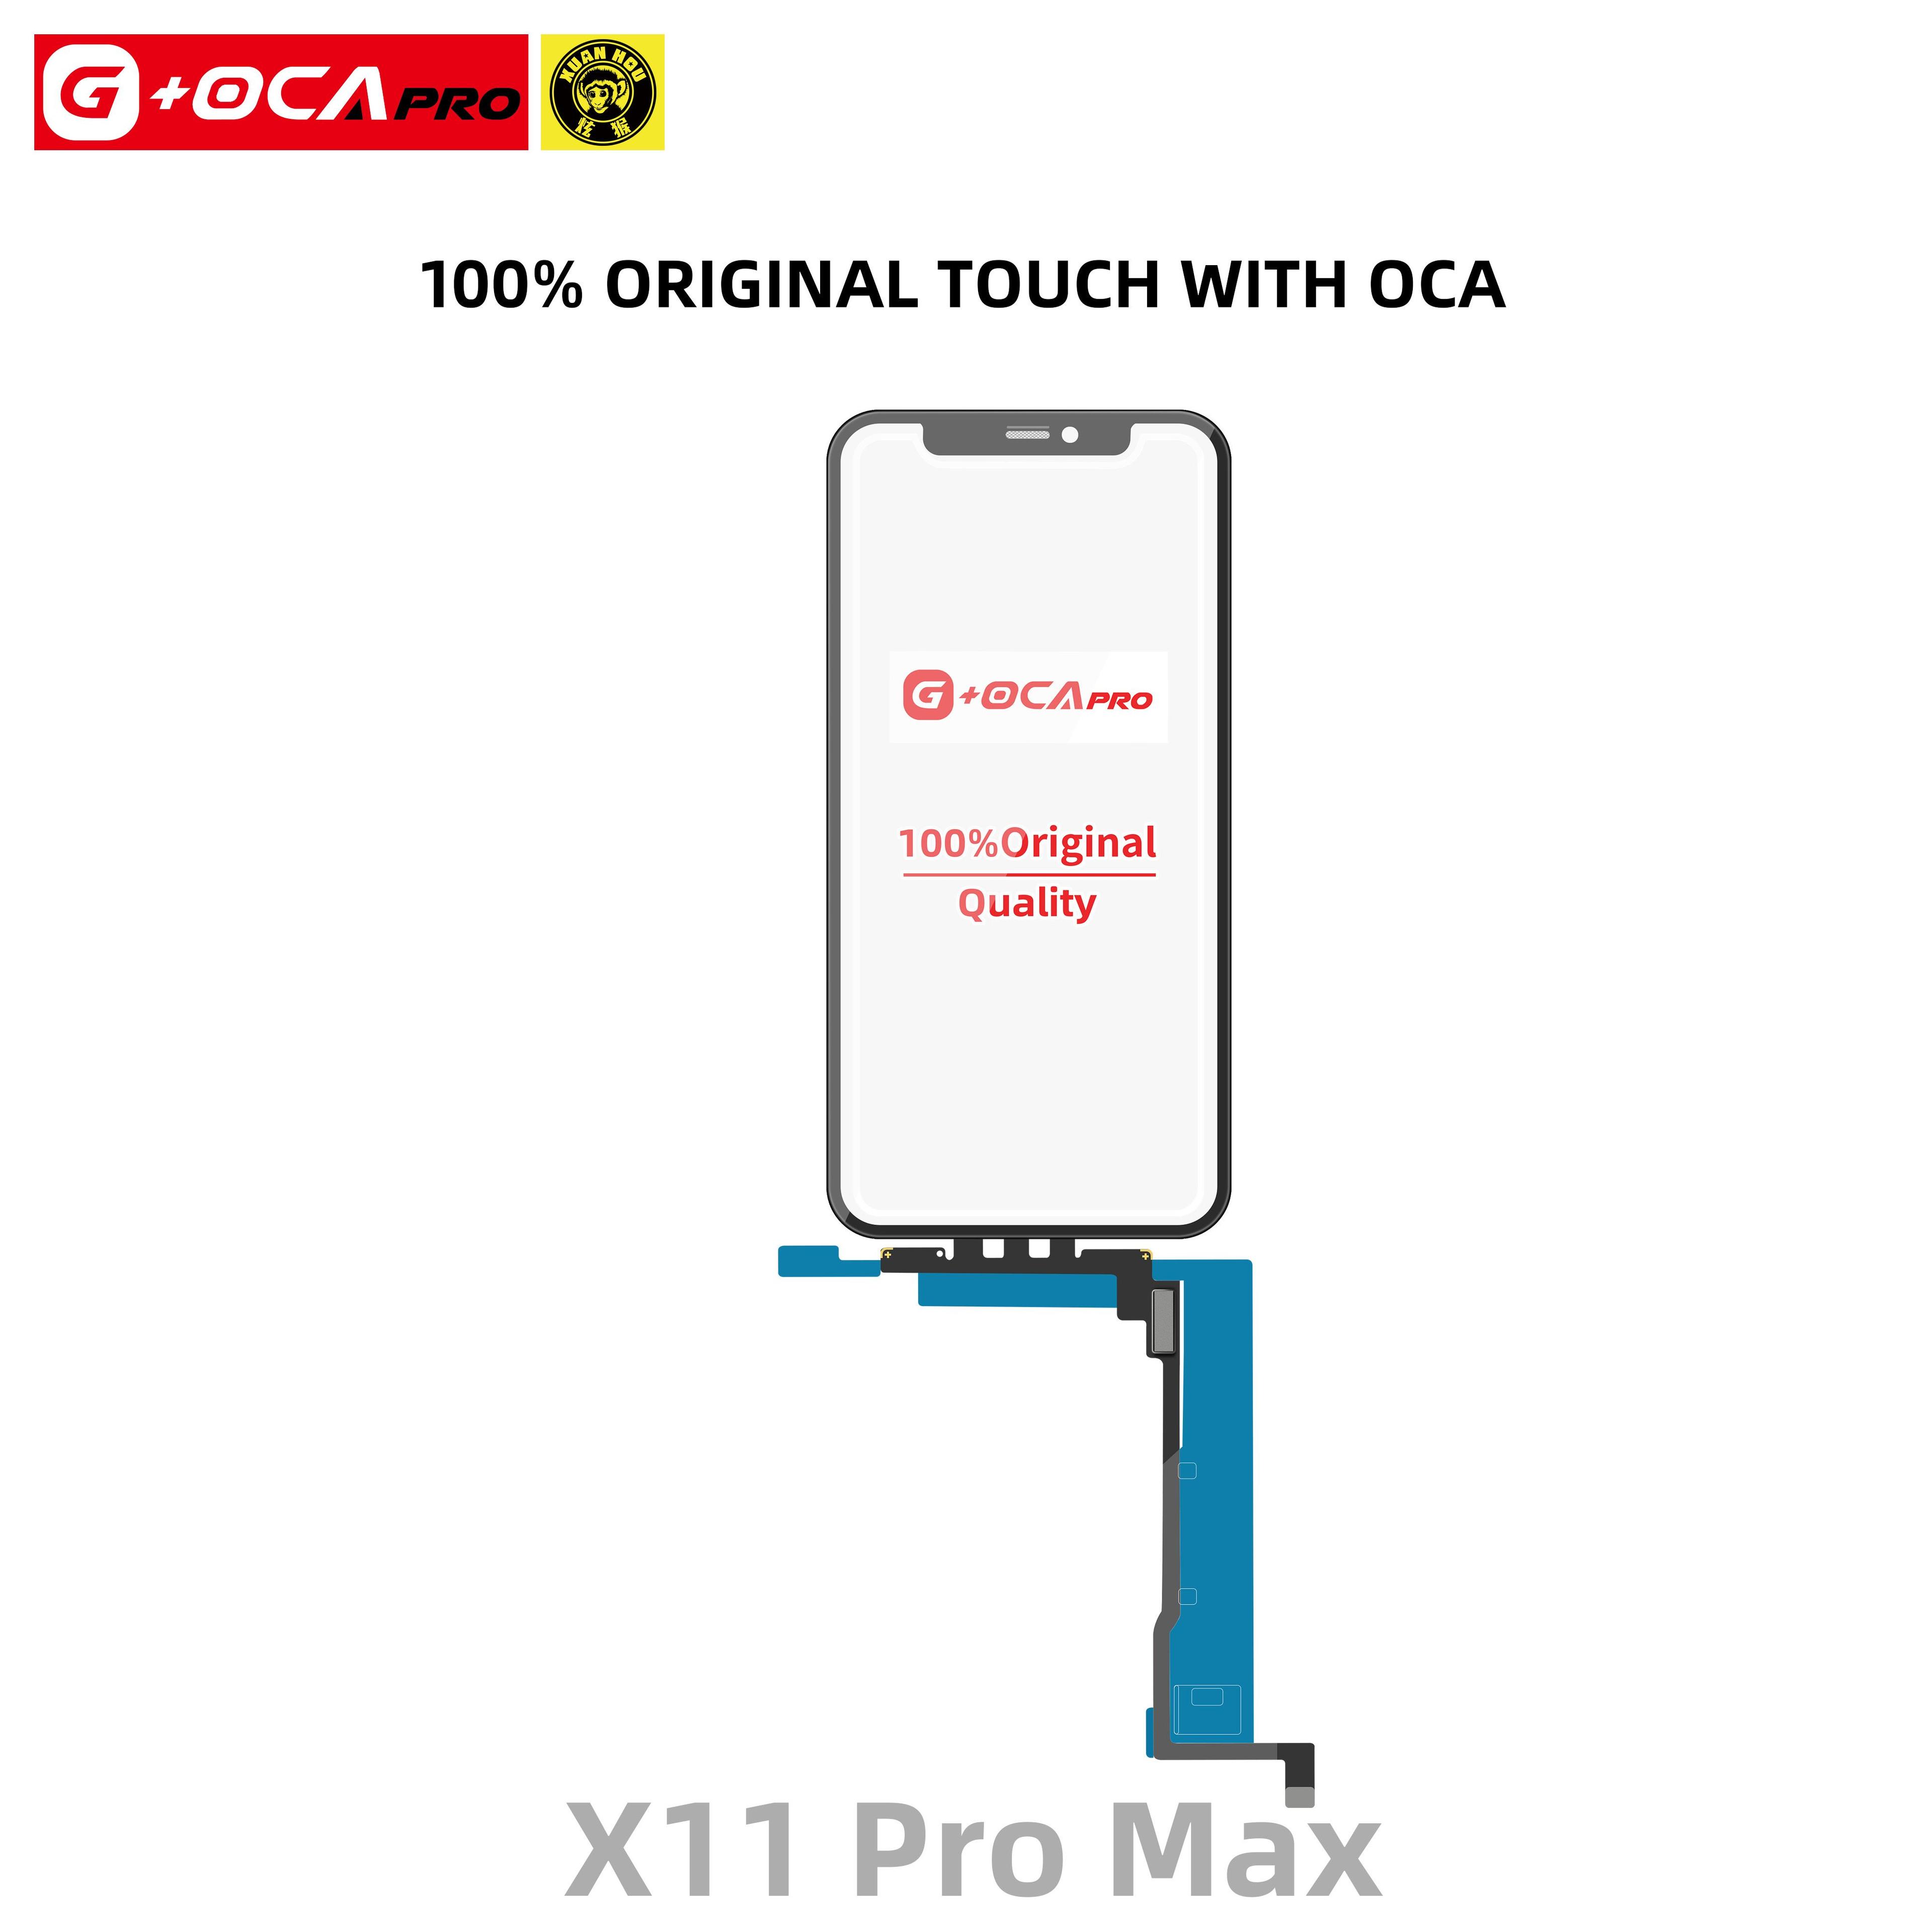 Touch Screen G + OCA Pro with original touch (with oleophobic cover) iPhone 11 Pro Max